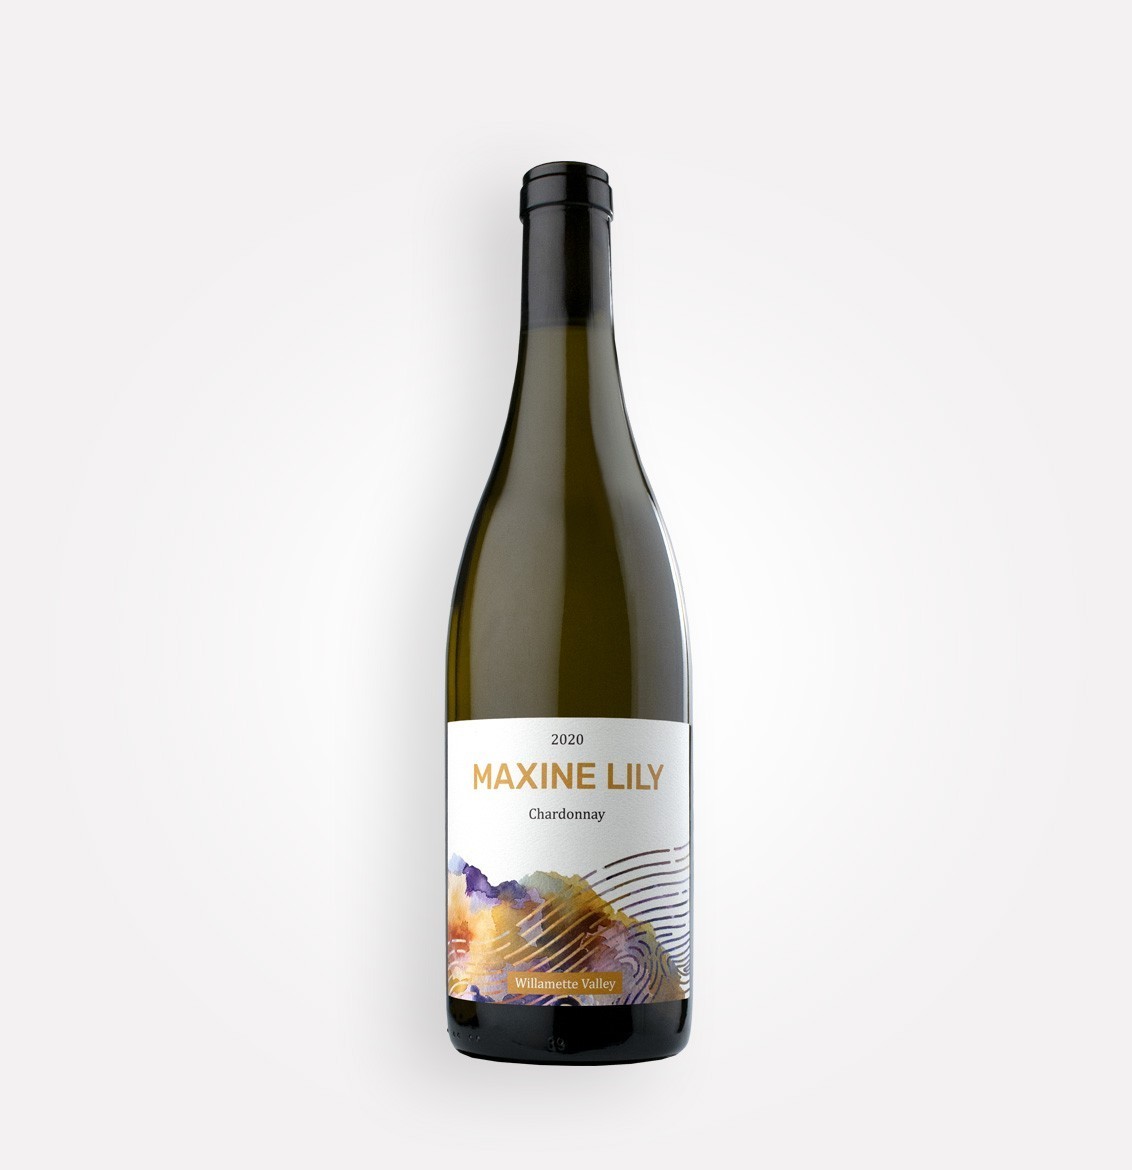 Bottle of Maxine Lily 2020 Chardonnay wine from Oregon's Willamette Valley